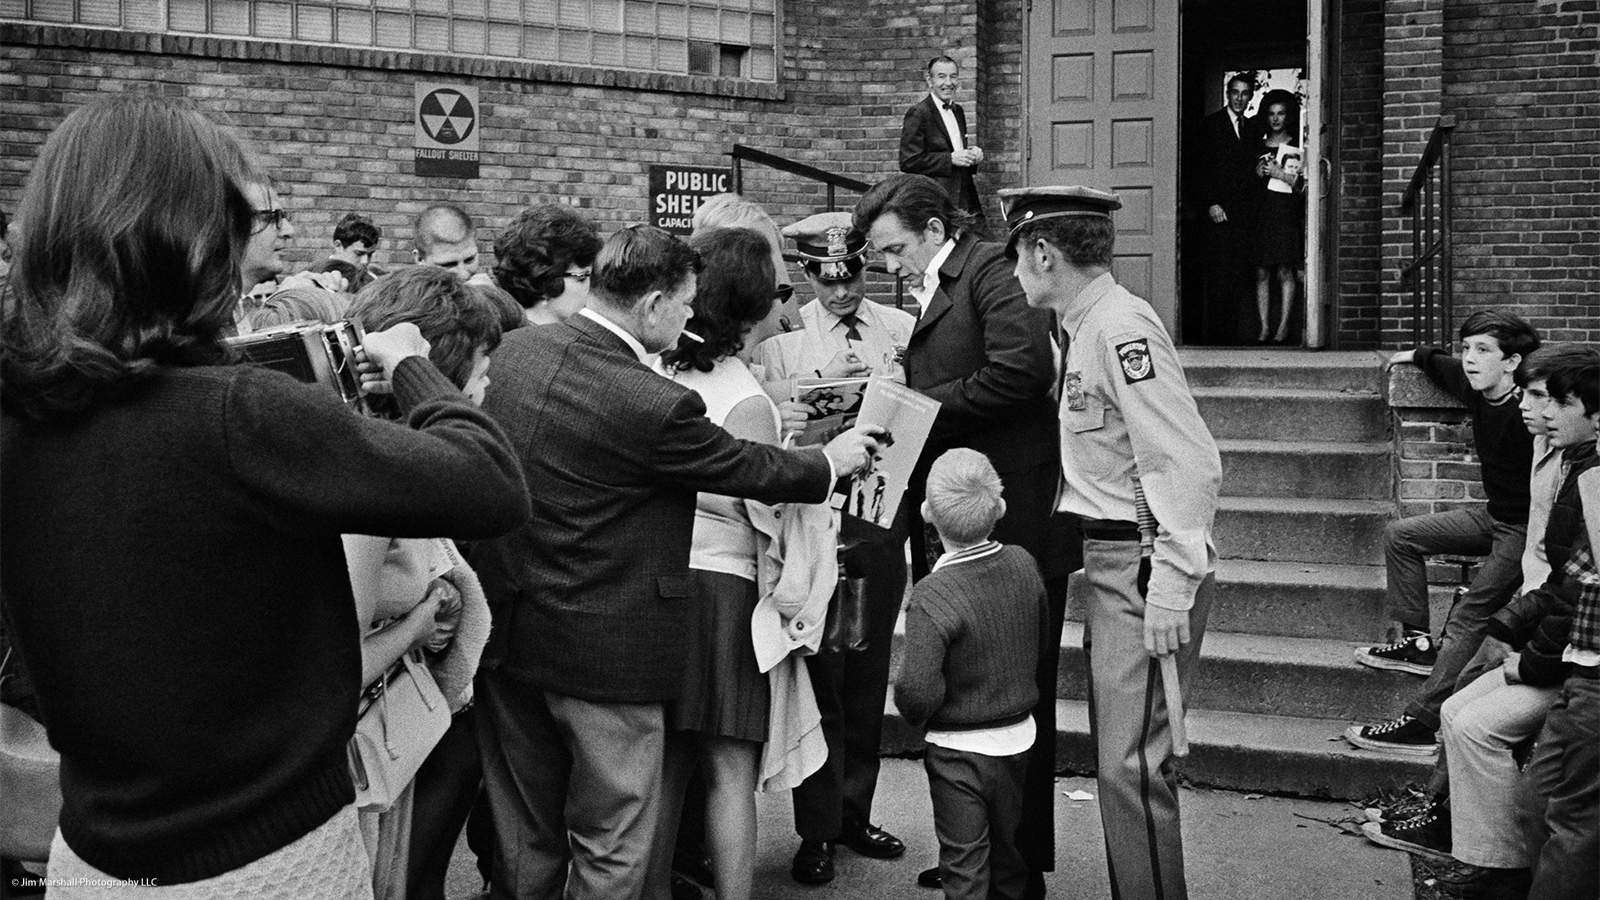 Johnny Cash and fans